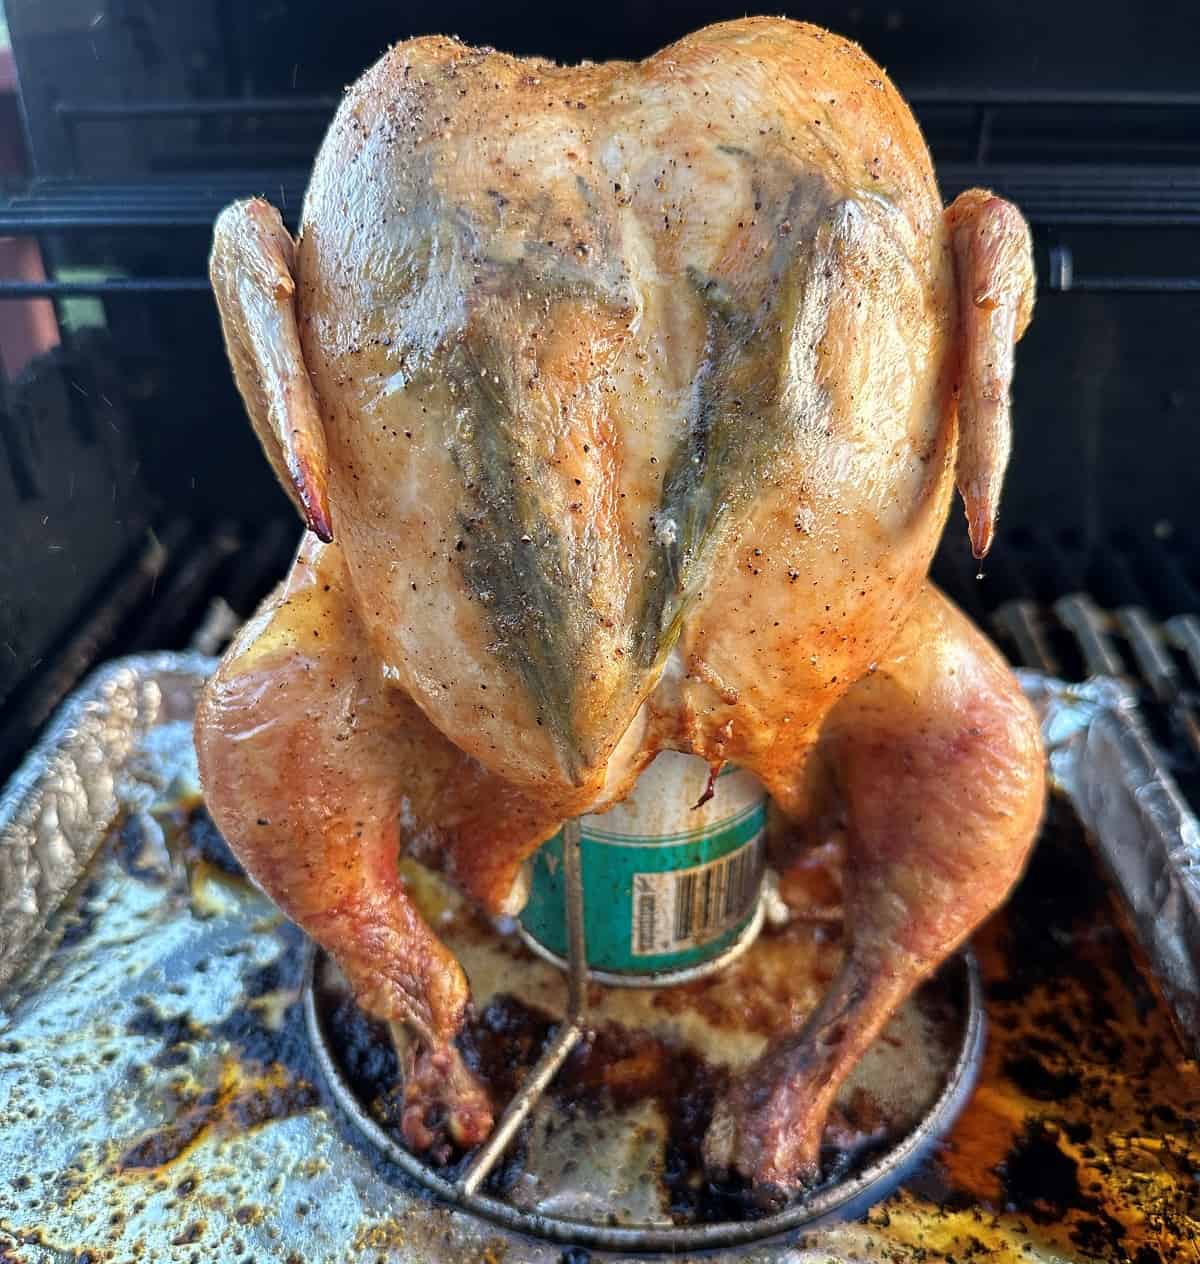 The Best Beer For Beer Can Chicken: Hard Cider?